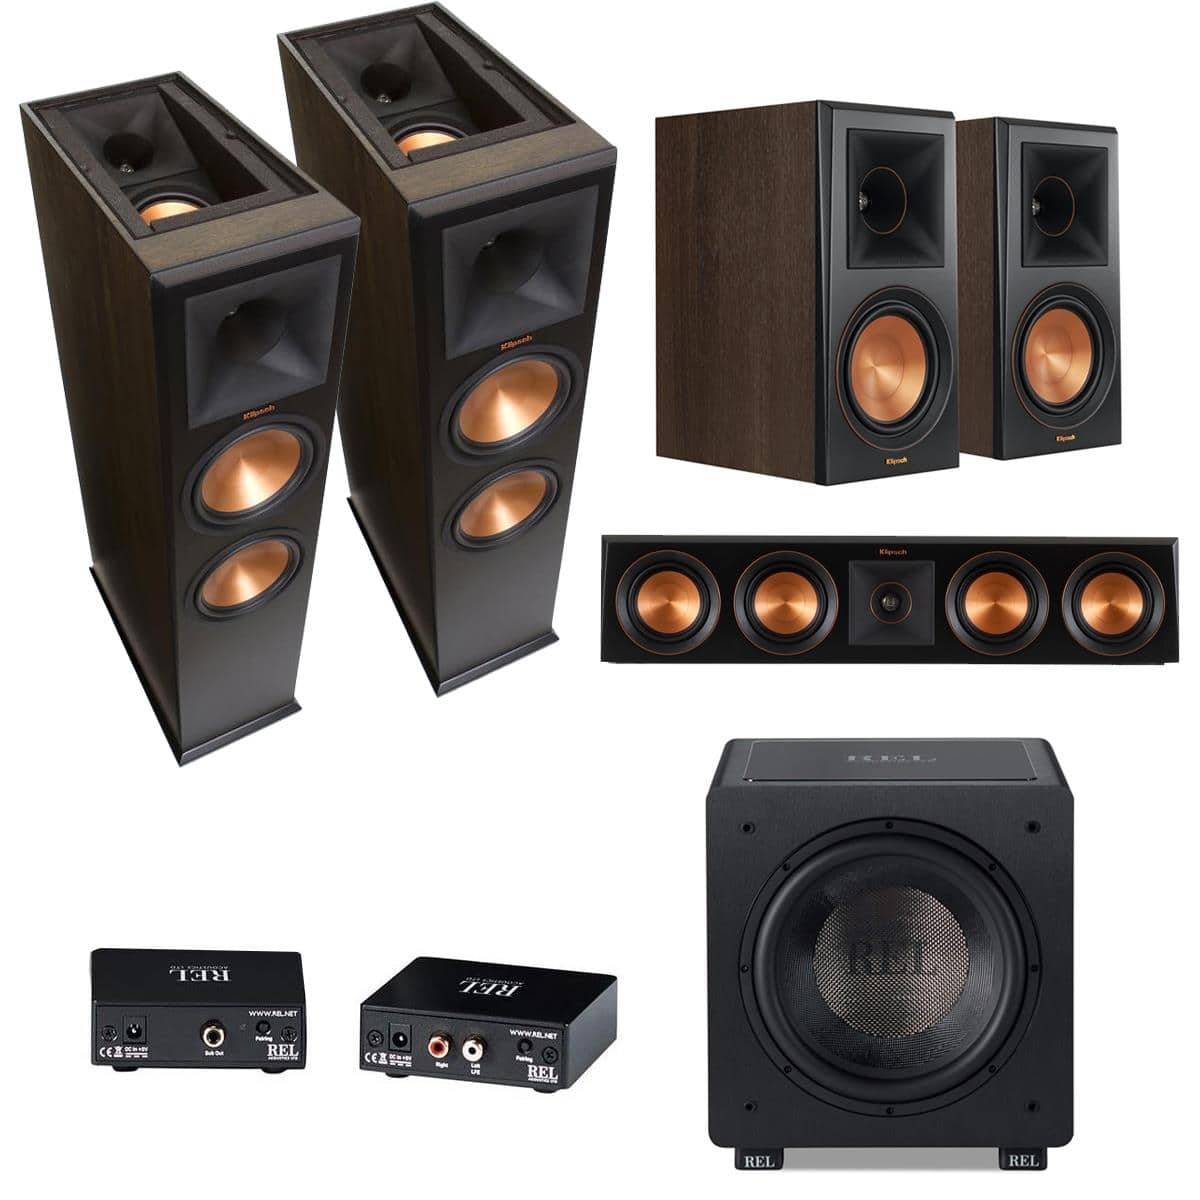 Klipsch Reference Premier Speakers: 2x RP-280FA, 2x RP-600M, RP-404C, Rel HT/1205 Sub